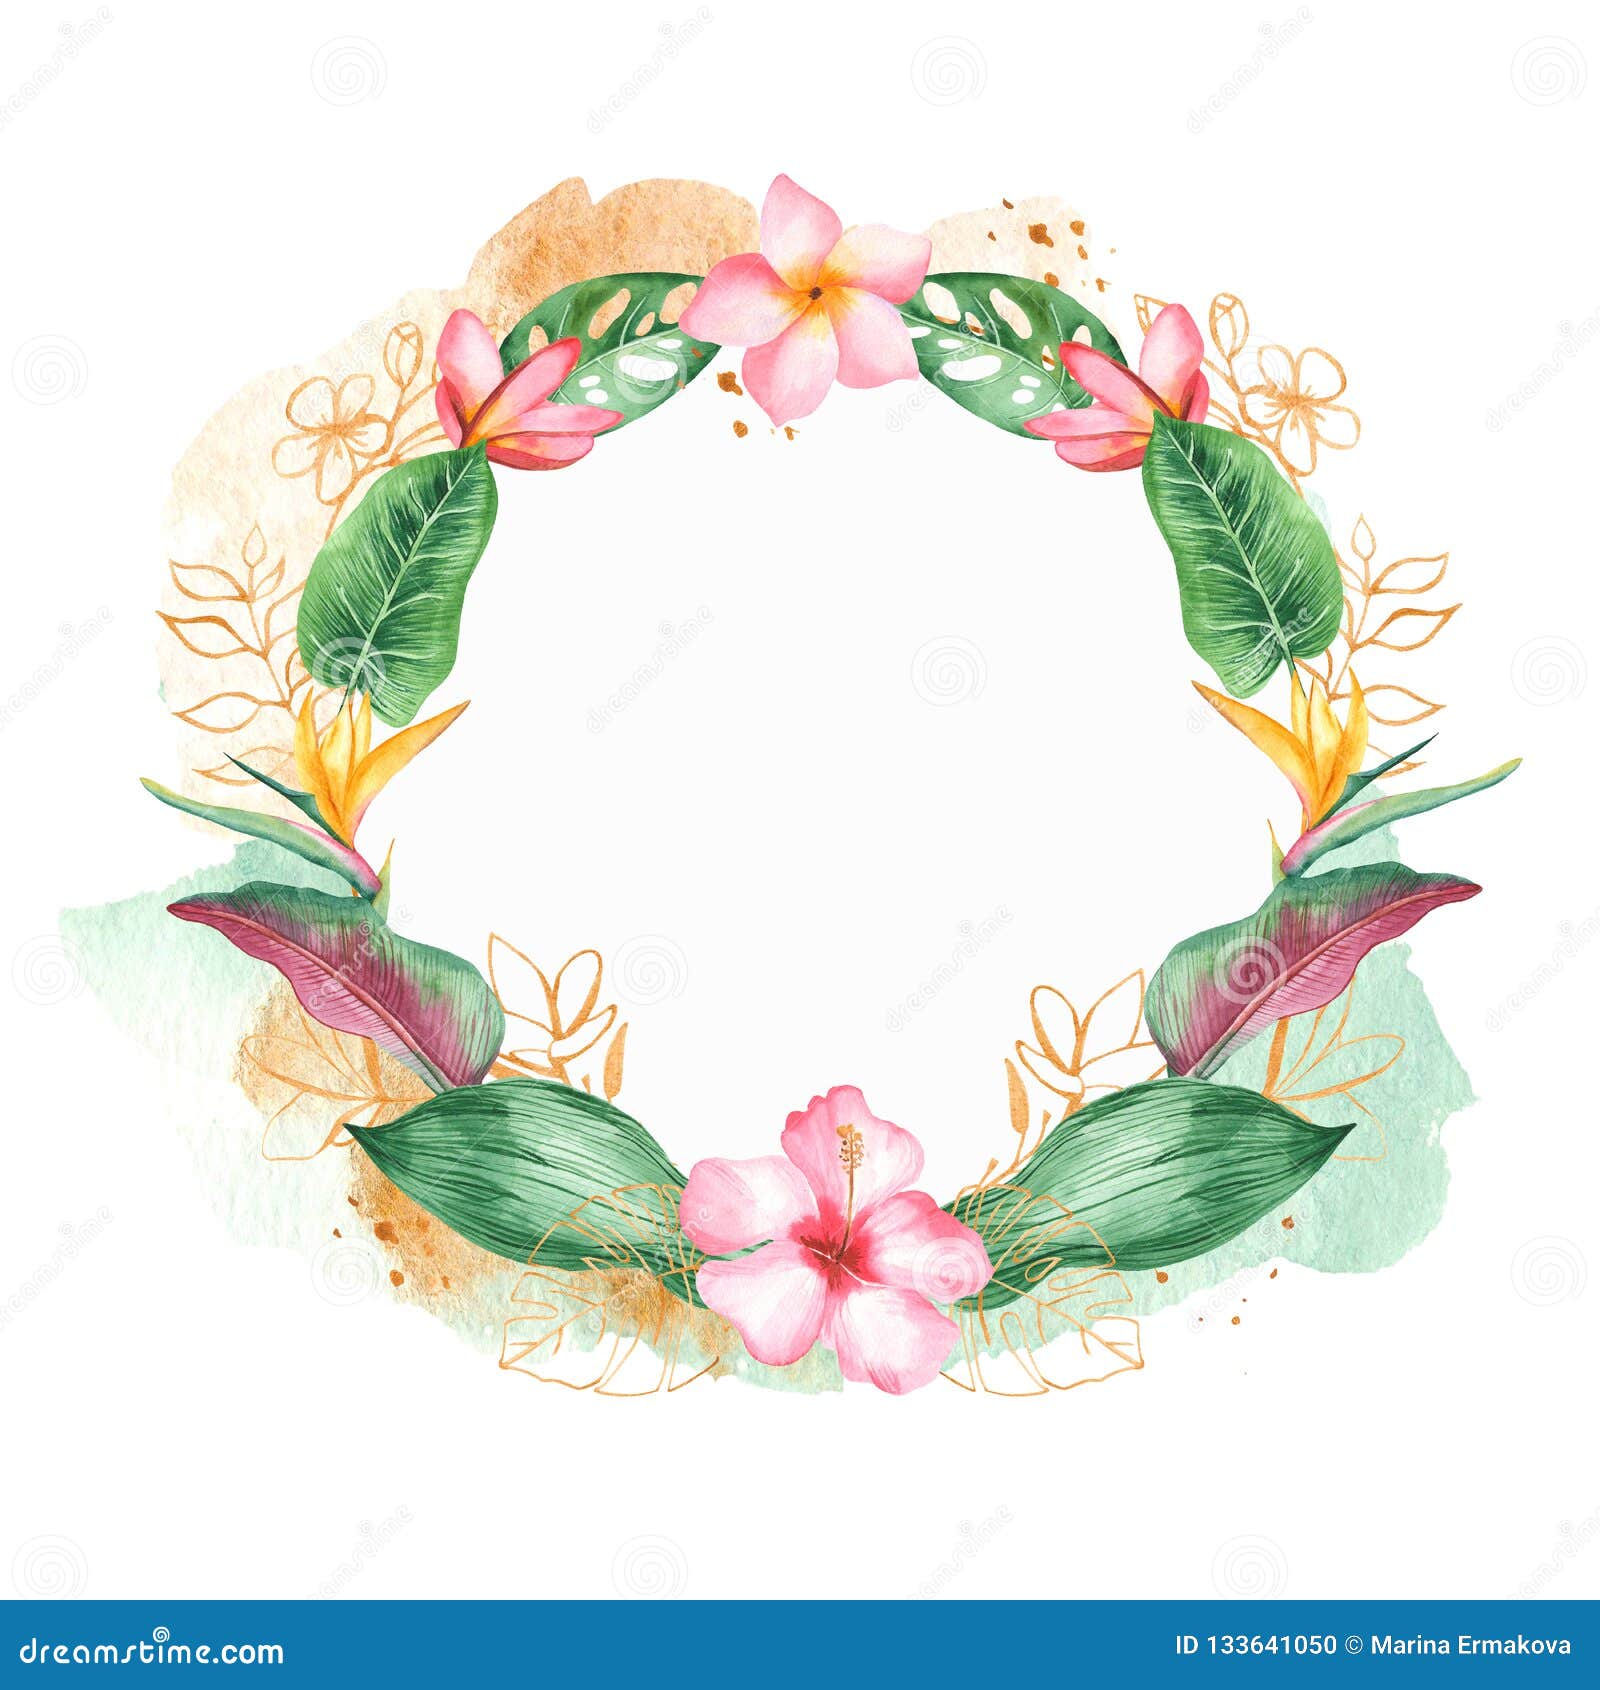 Watercolor Wreath with Tropical Leaves and Flowers, Watercolor Stains ...